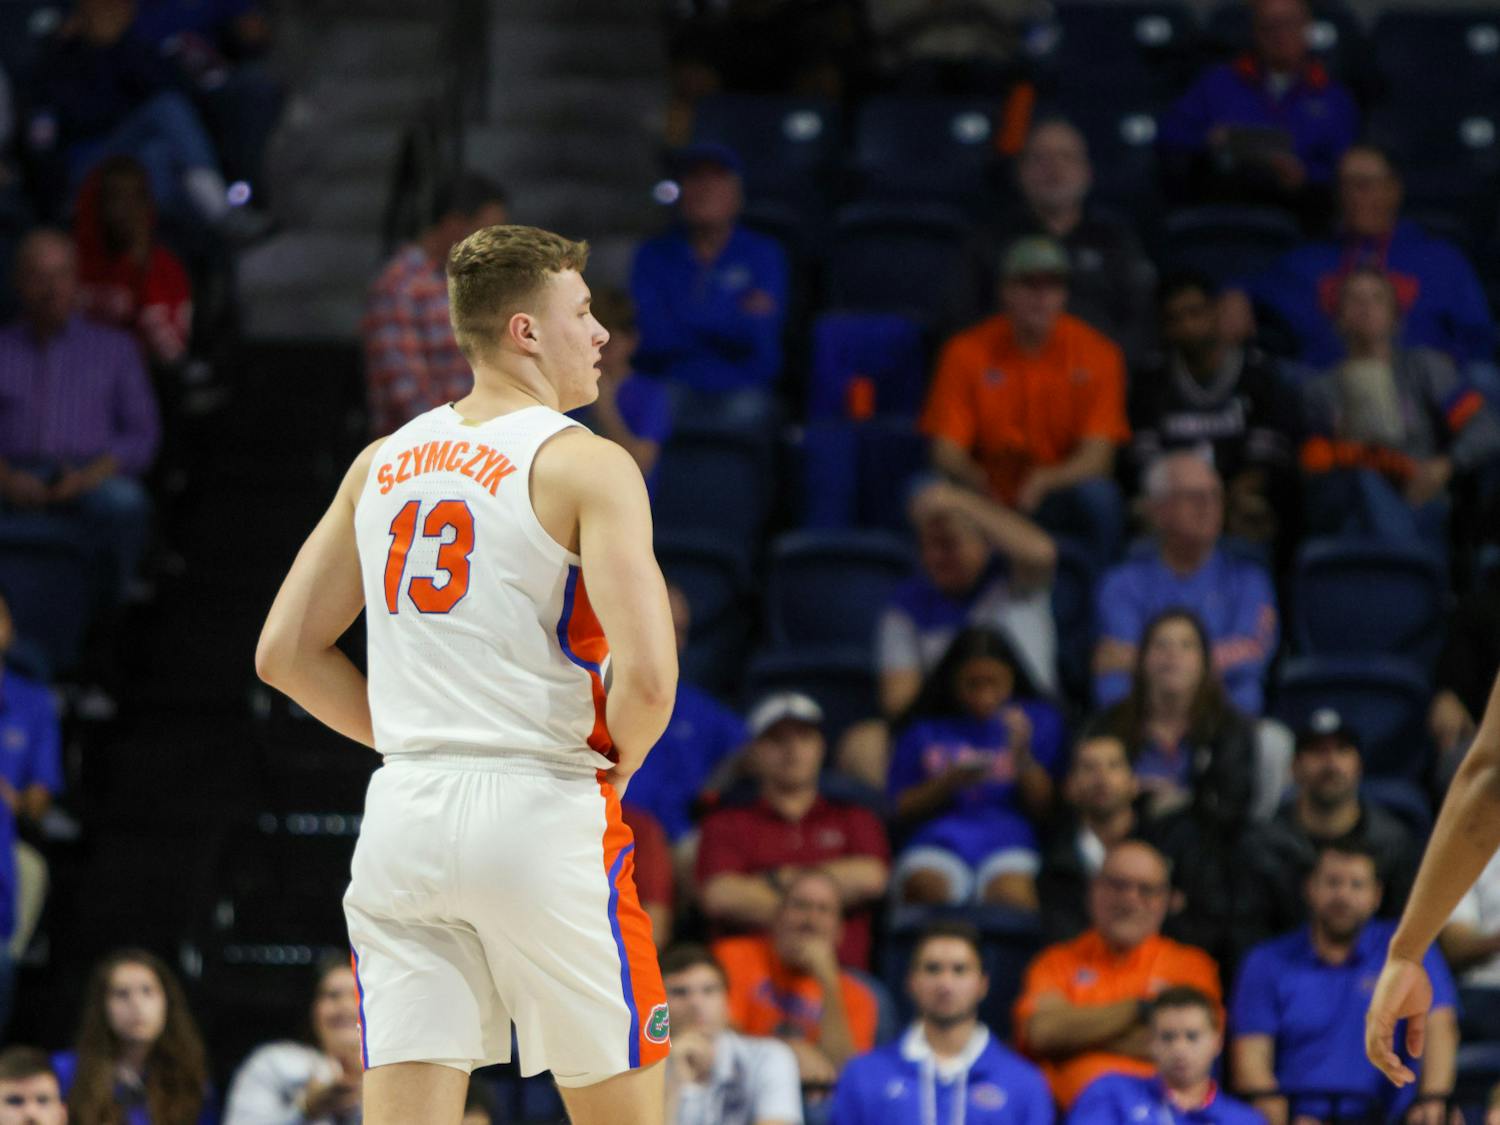 Aleks Szymczyk stands on the court in the Gators men's basketball's 81-60 win against South Carolina Gamecocks on Wednesday, Jan. 25, 2023. 